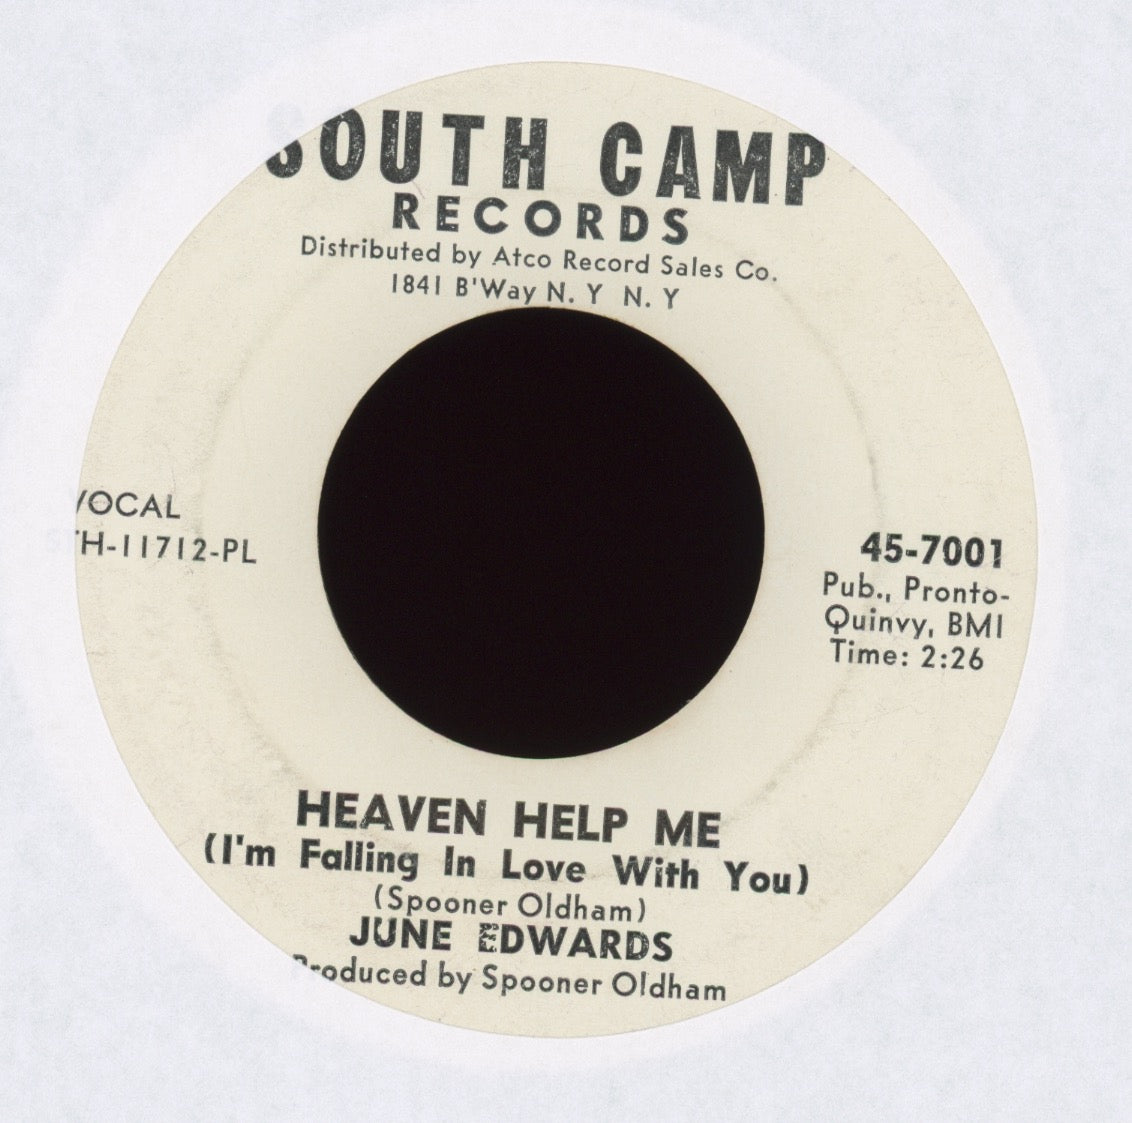 June Edwards - Heaven Help Me (I'm Falling in Love With You) on South Camp Promo